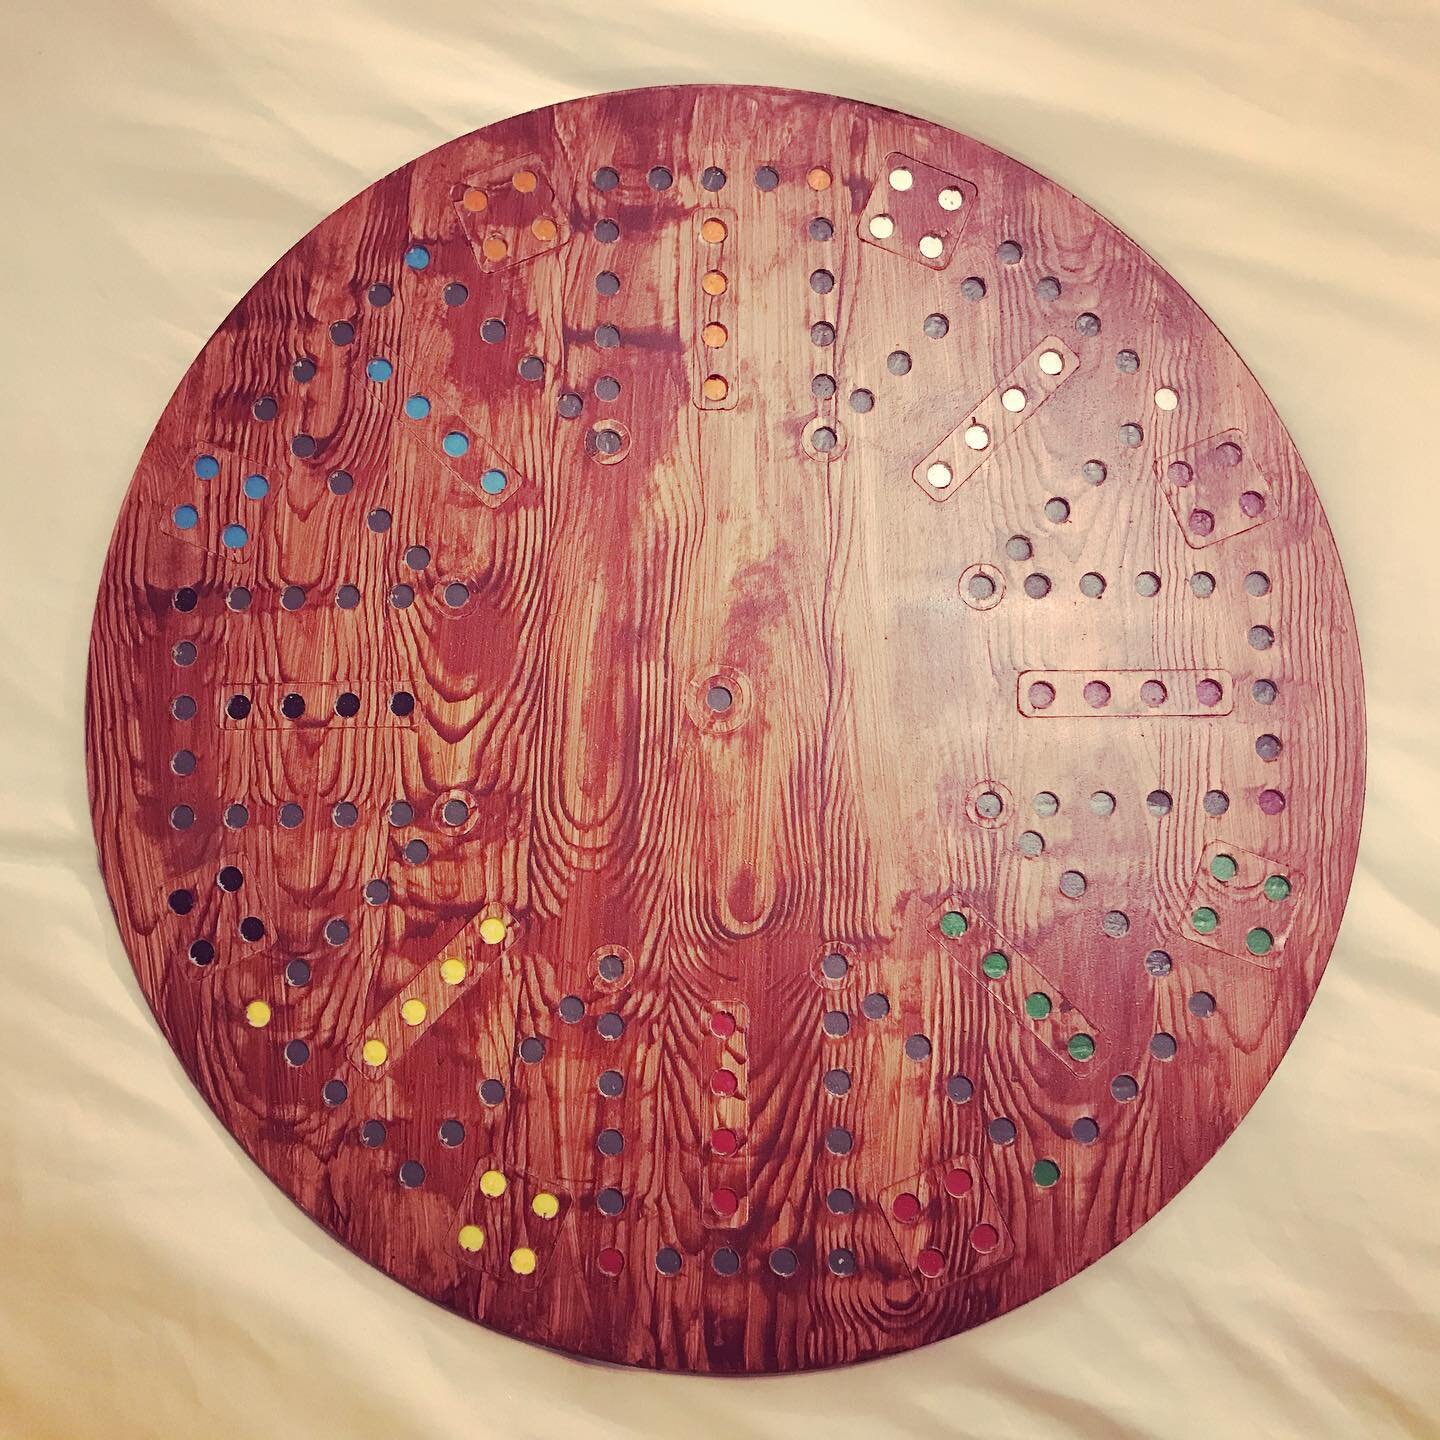 8 player aggravation board game #aggravation #boardgames #diy #fuaxwood #spaypaint #woodstain #industrialdesign #gamedesign